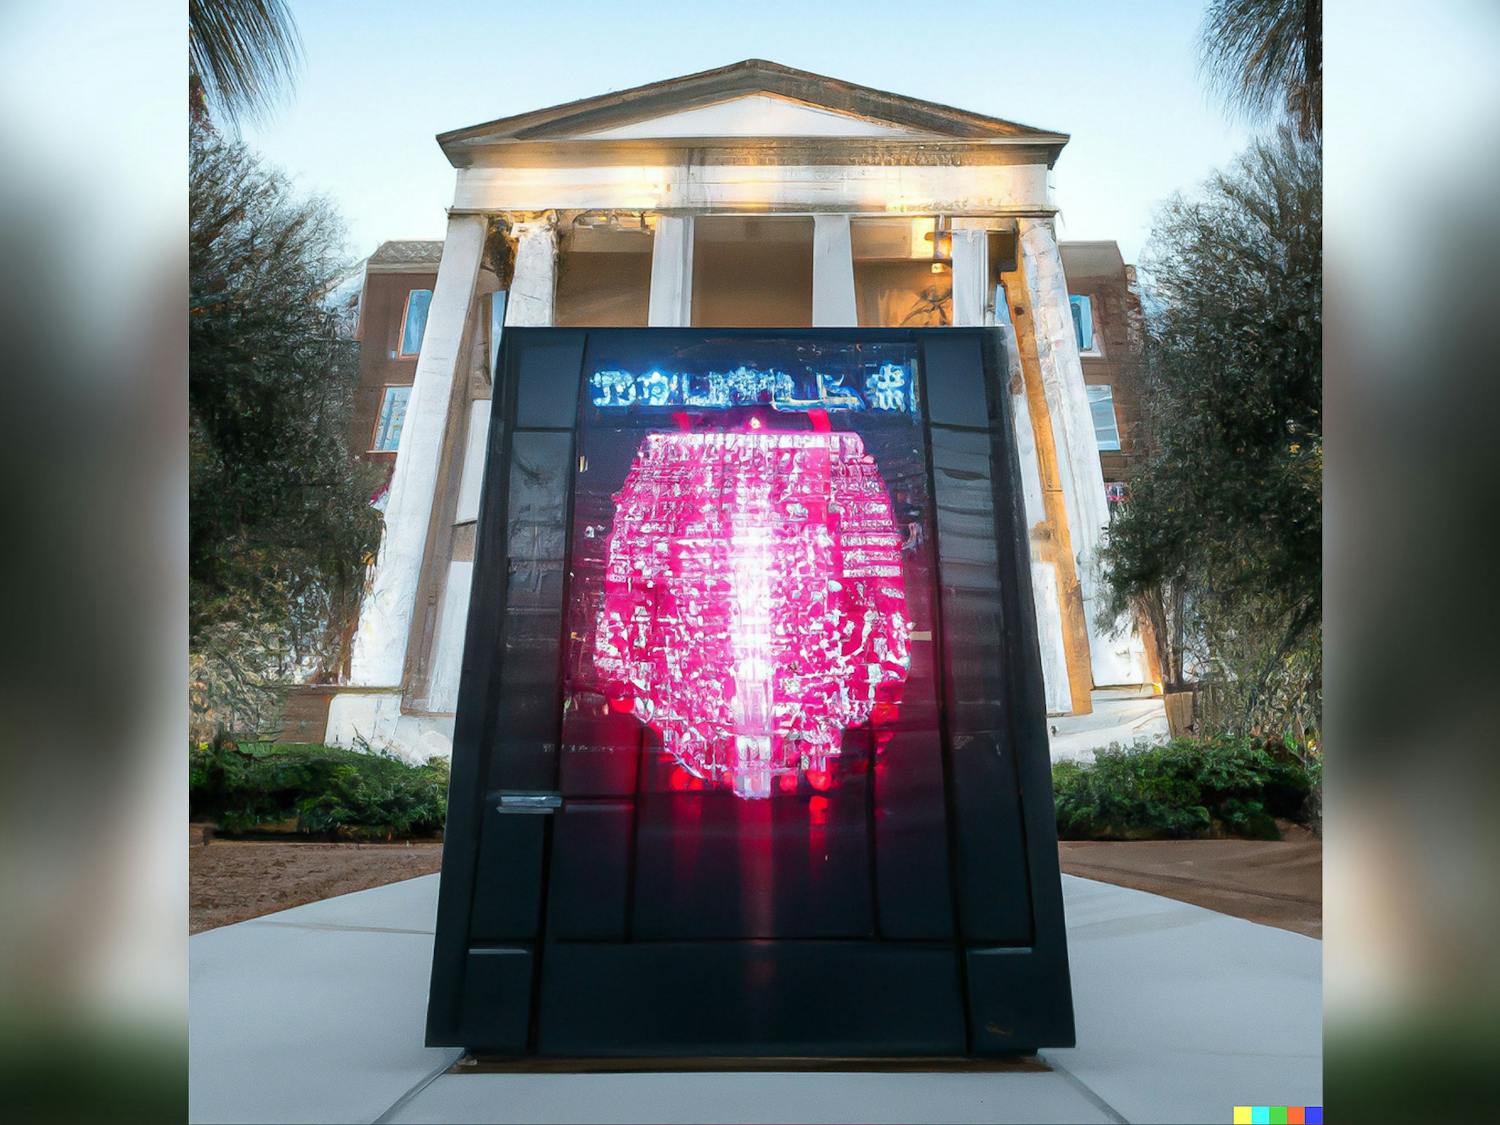 This visual was generated on Jan. 25 by OpenAI's software, DALL-E 2, when given the prompt "An AI supercomputer taking over a university." OpenAI also produced ChatGPT, an AI chatbot that is already changing the way educators teach.